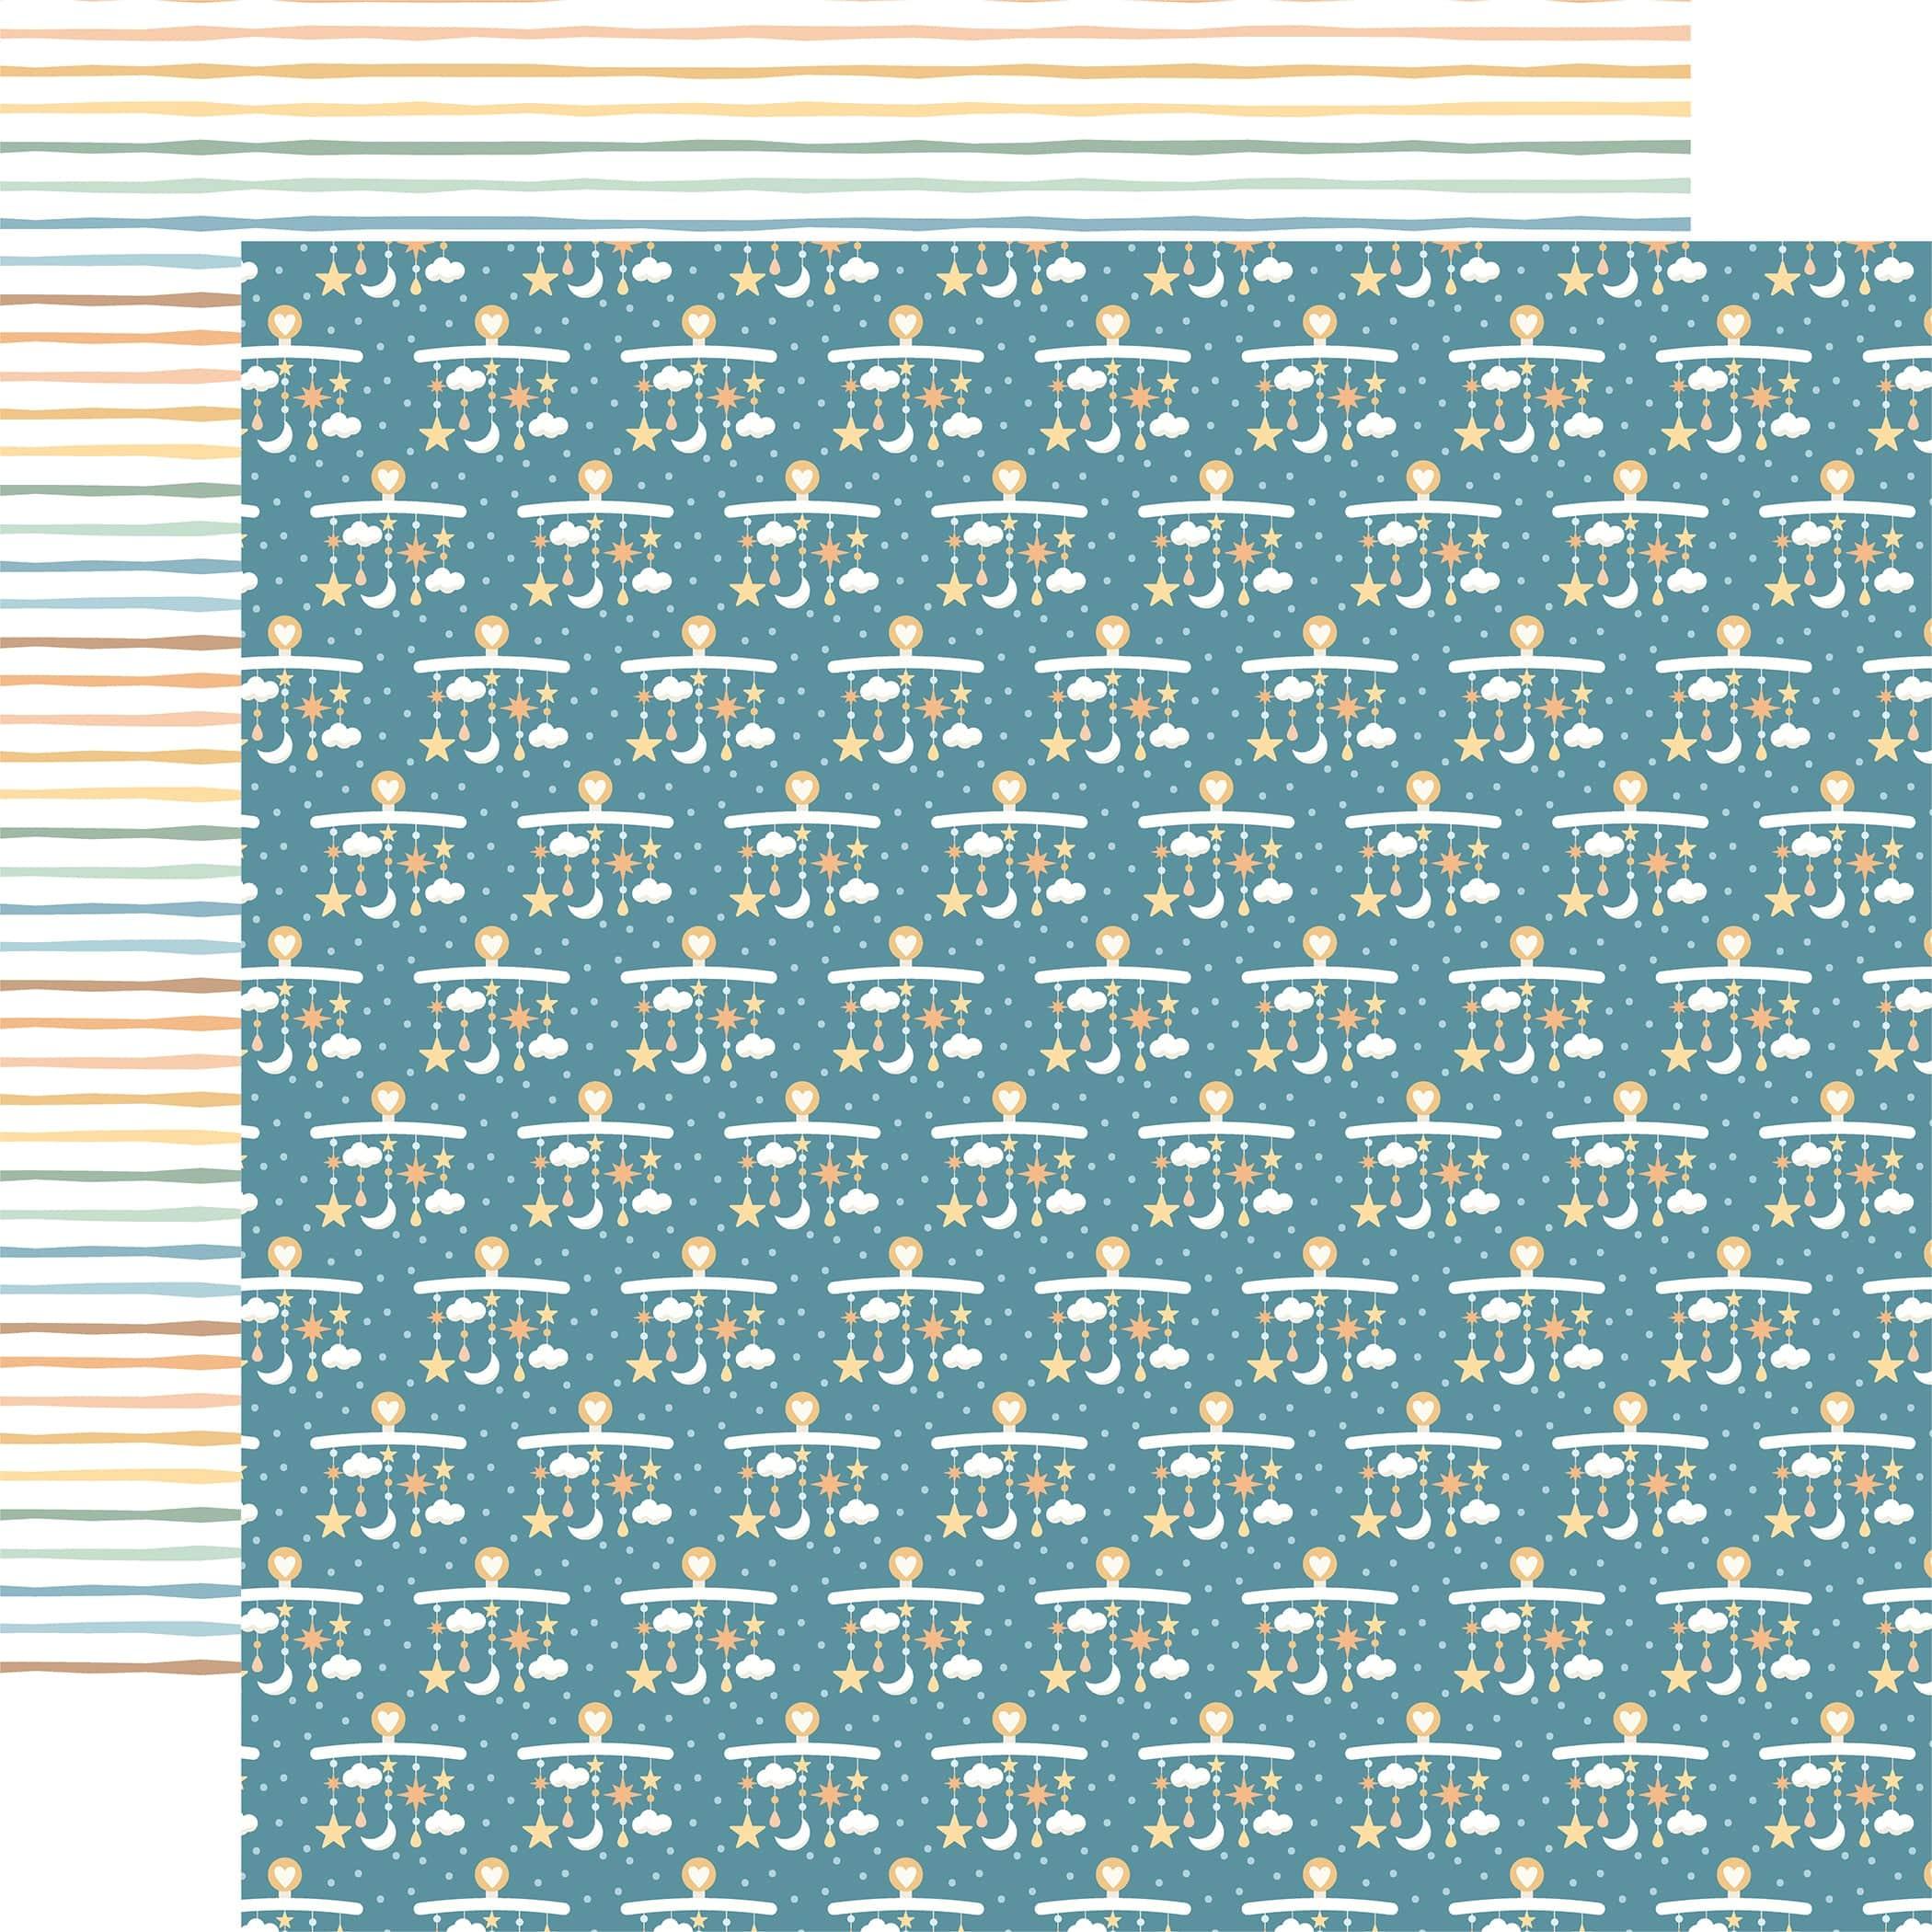 Blue Elephant Baby Boy 12x12 Scrapbook Paper - 4 Sheets – Country